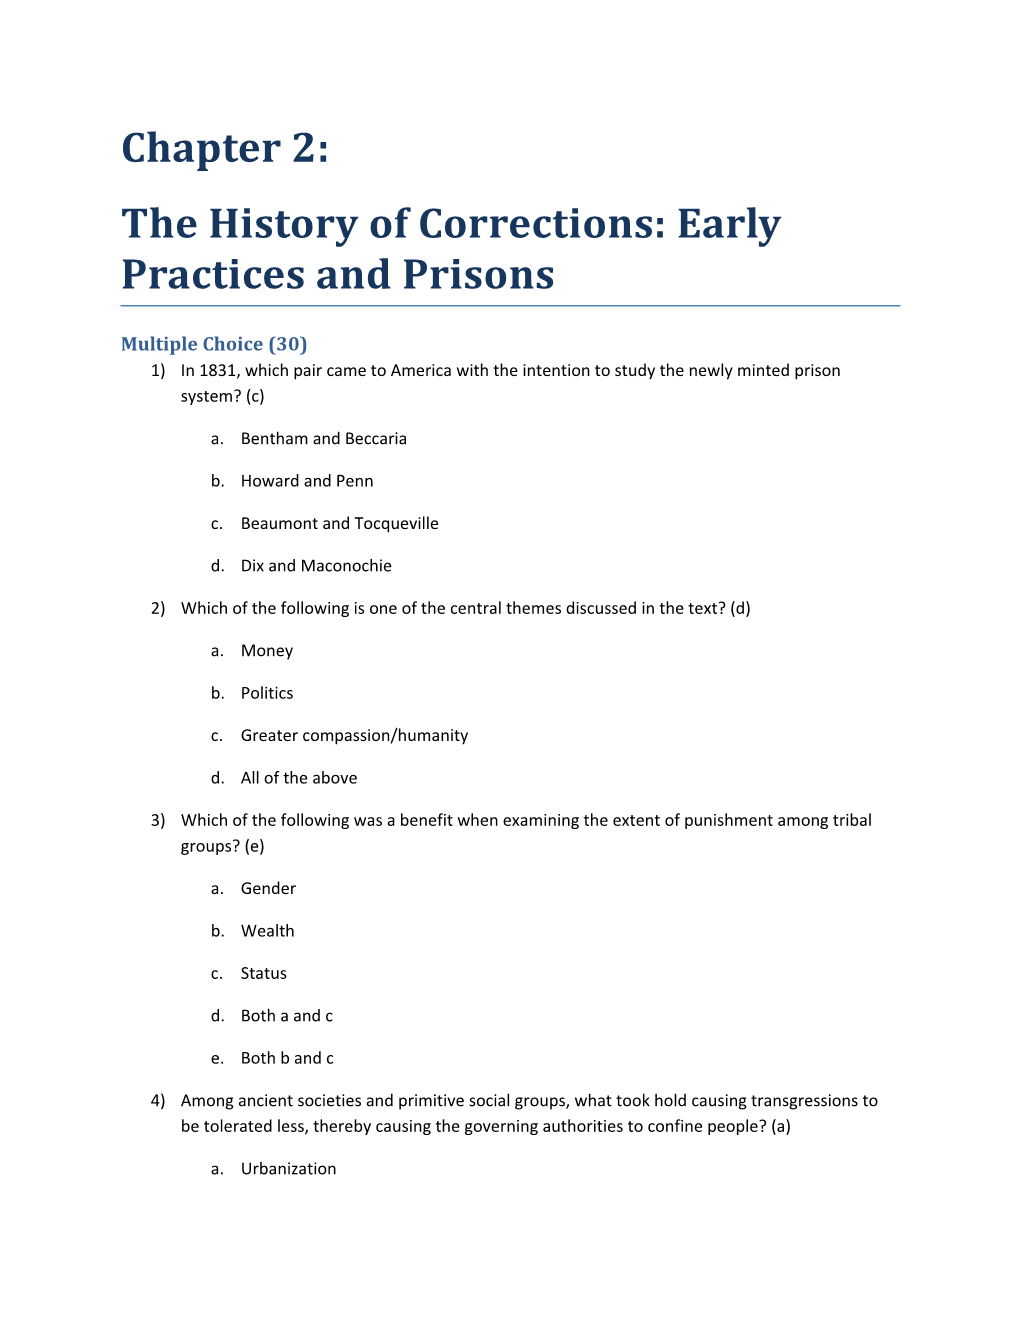 The History of Corrections: Early Practices and Prisons